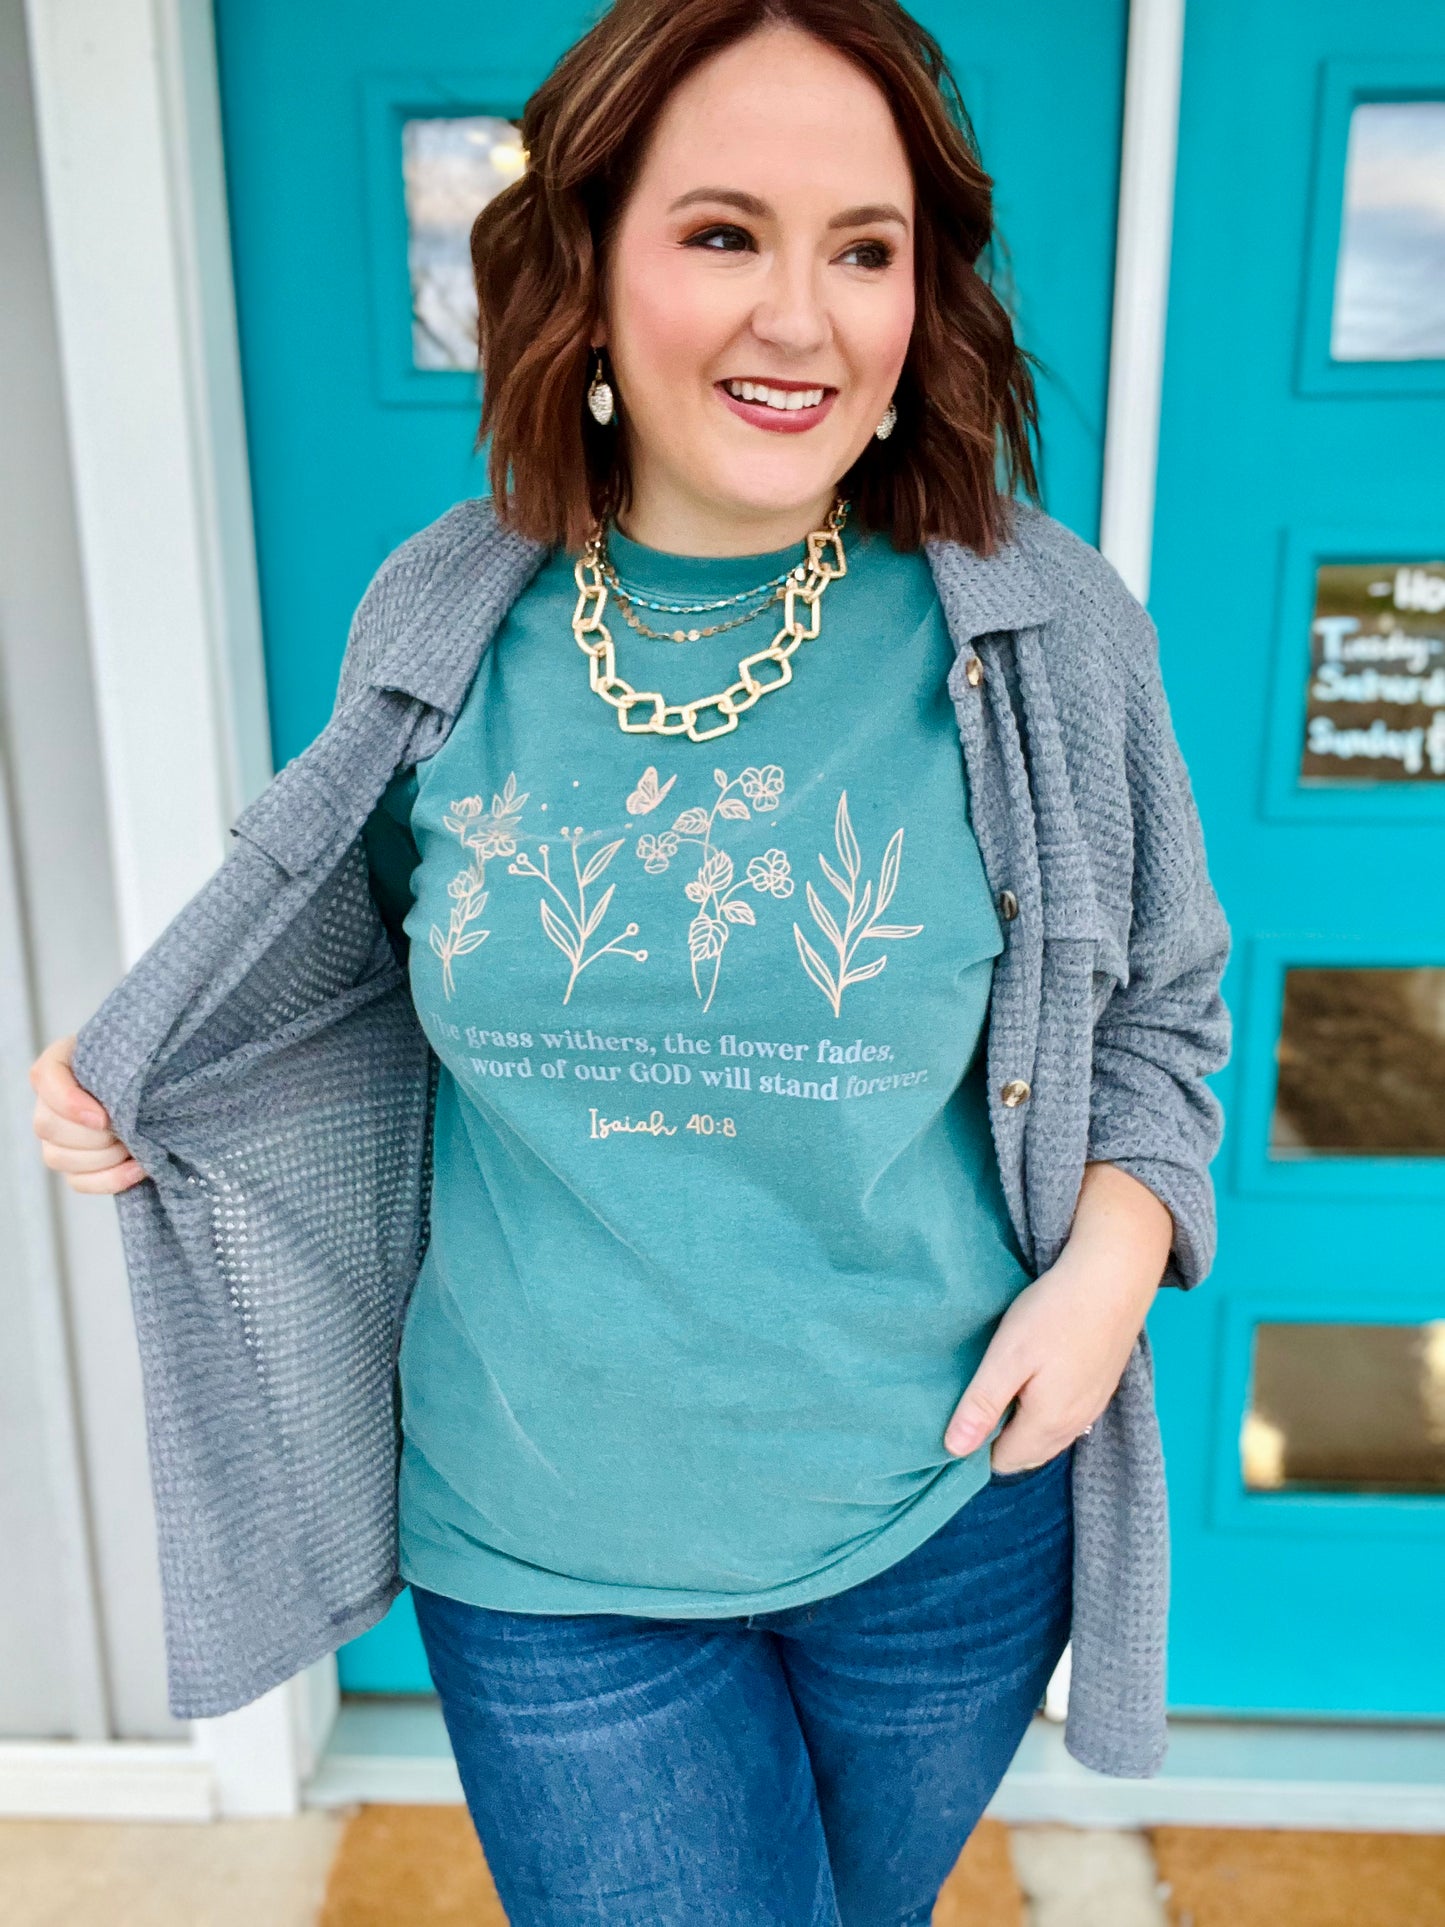 Isaiah 40:8 Boho Floral Tee on Comfort Color